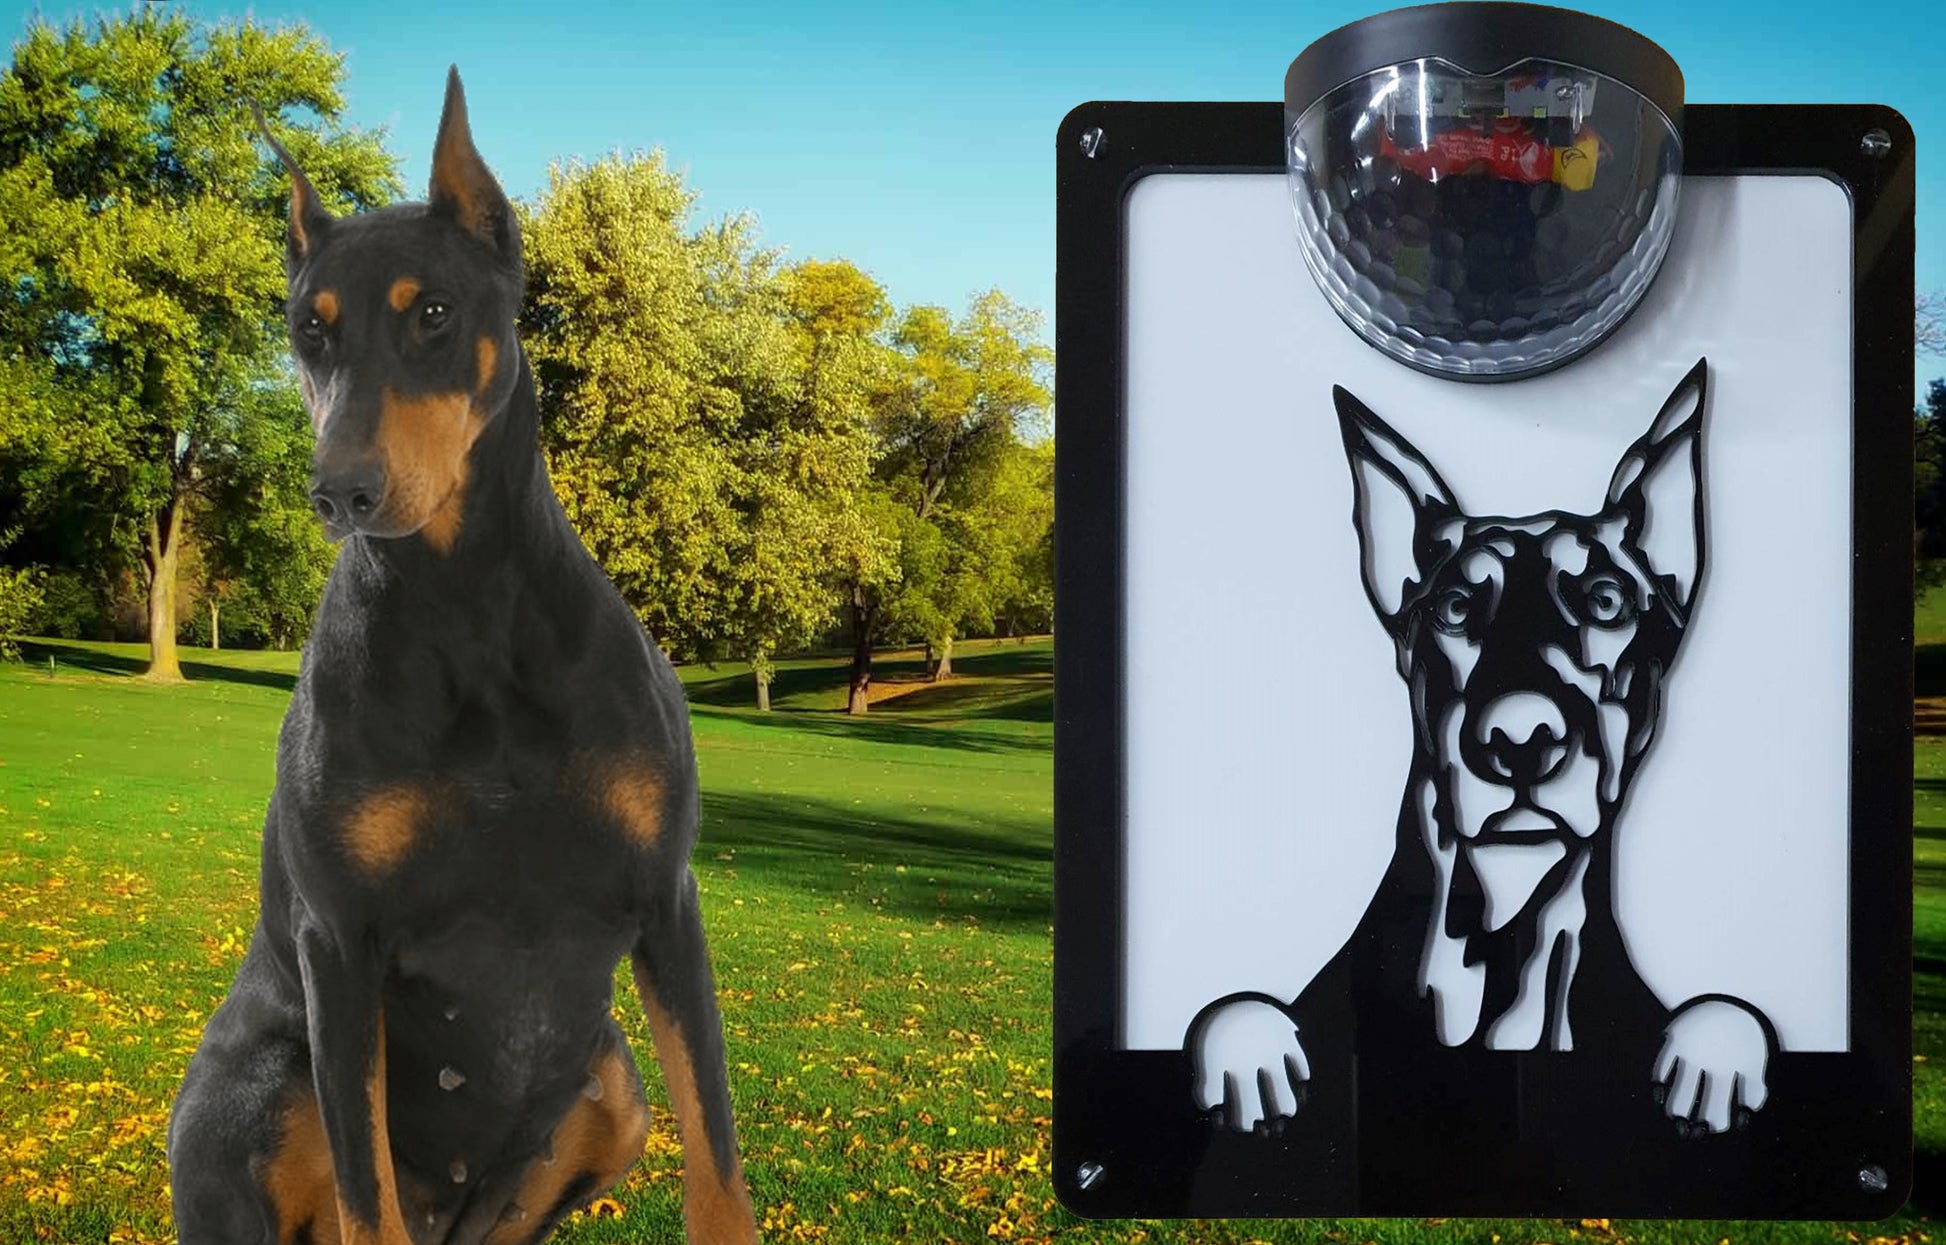 Garden Solar Light Wall Plaque.
Most Dog Breeds Available Please Message If You Cant See Your Breed.
Brighten Up Your Fences And Gardens With These Decorative Solar John Alans